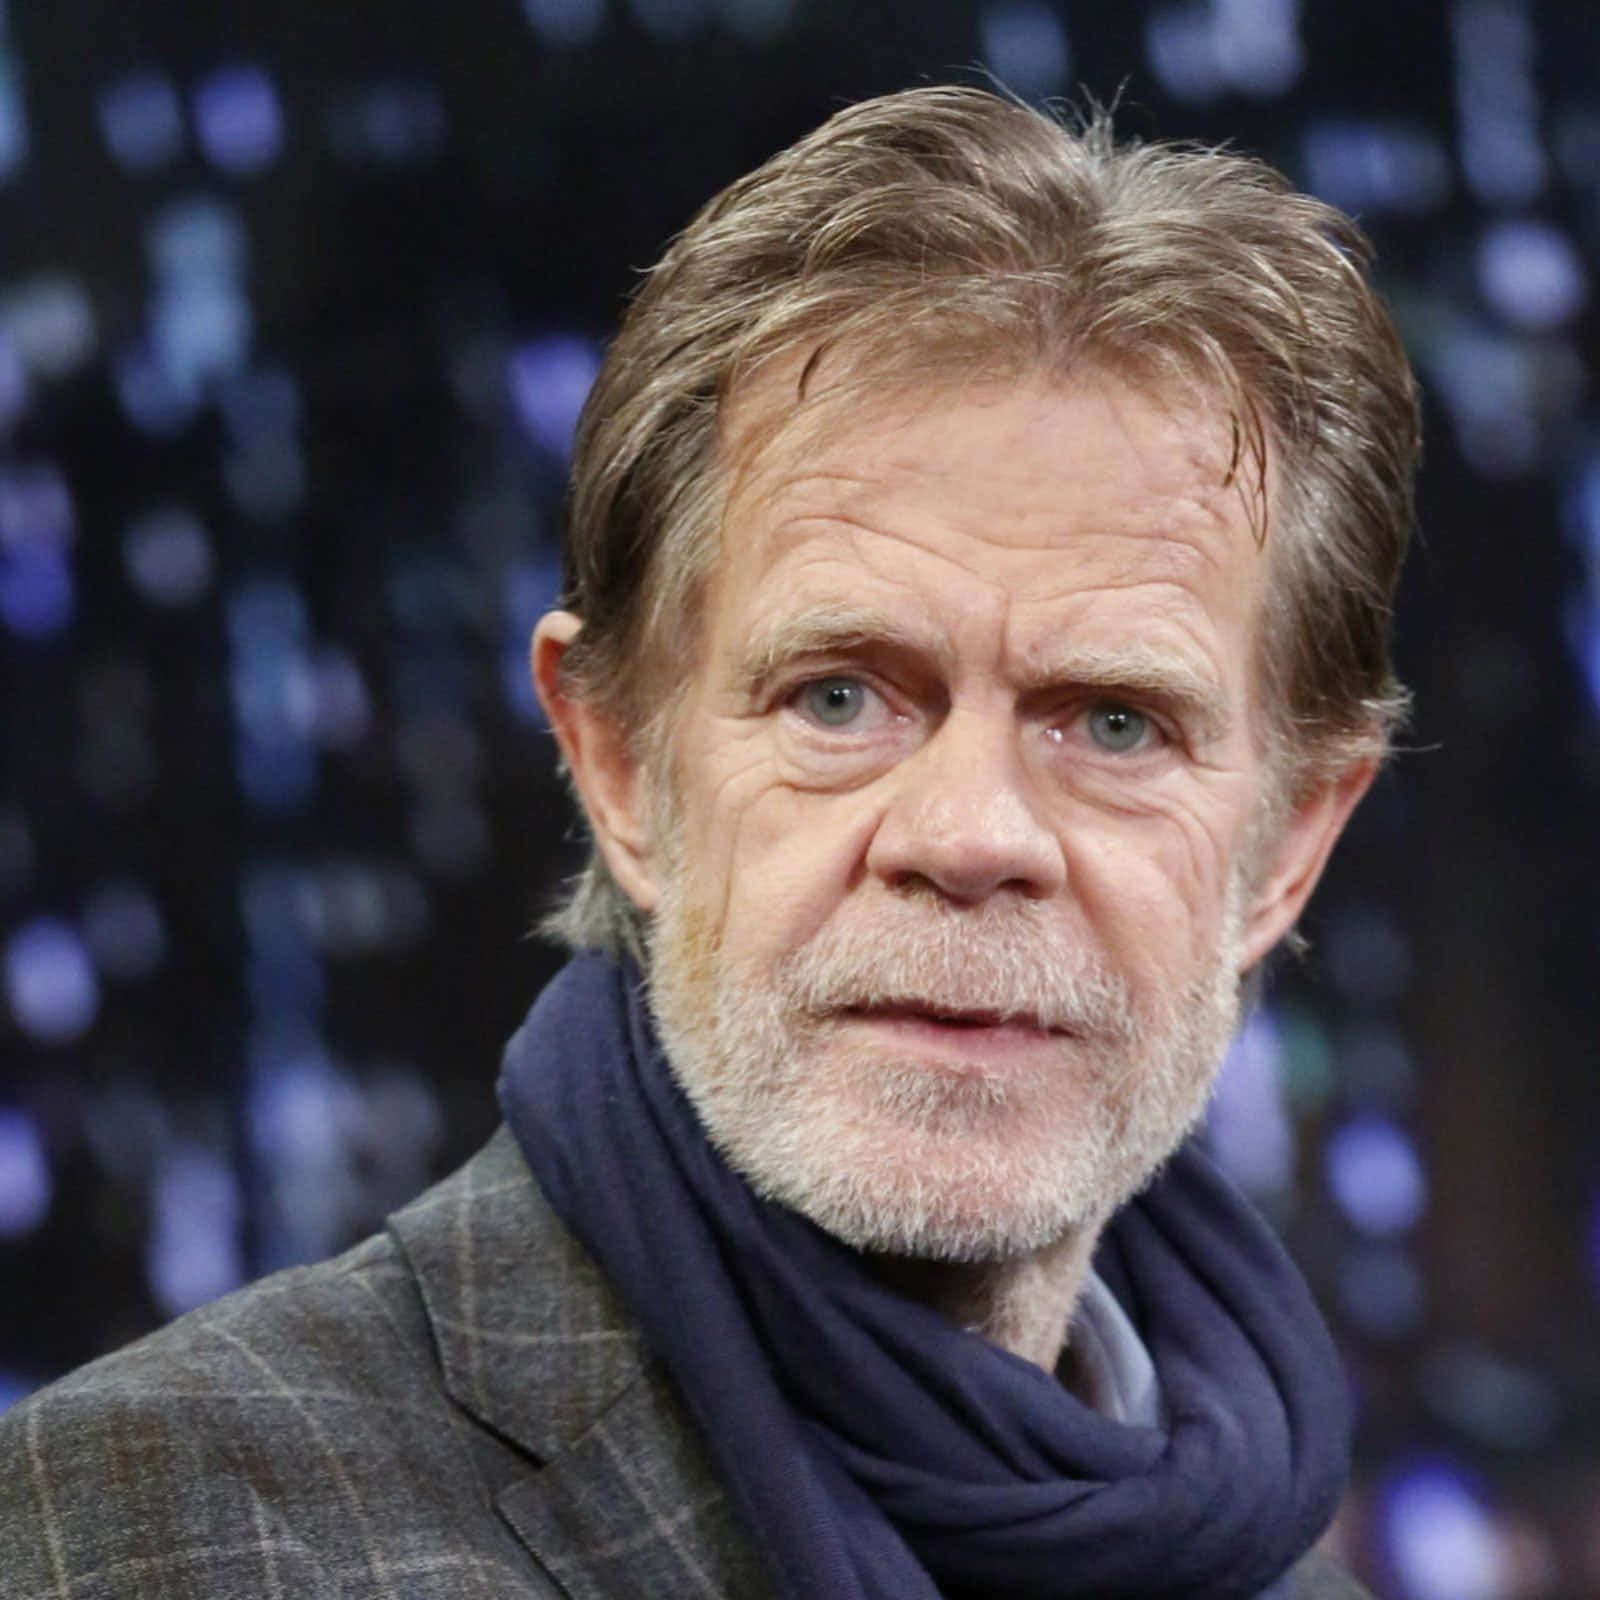 William H. Macy Striking A Confident Pose Background